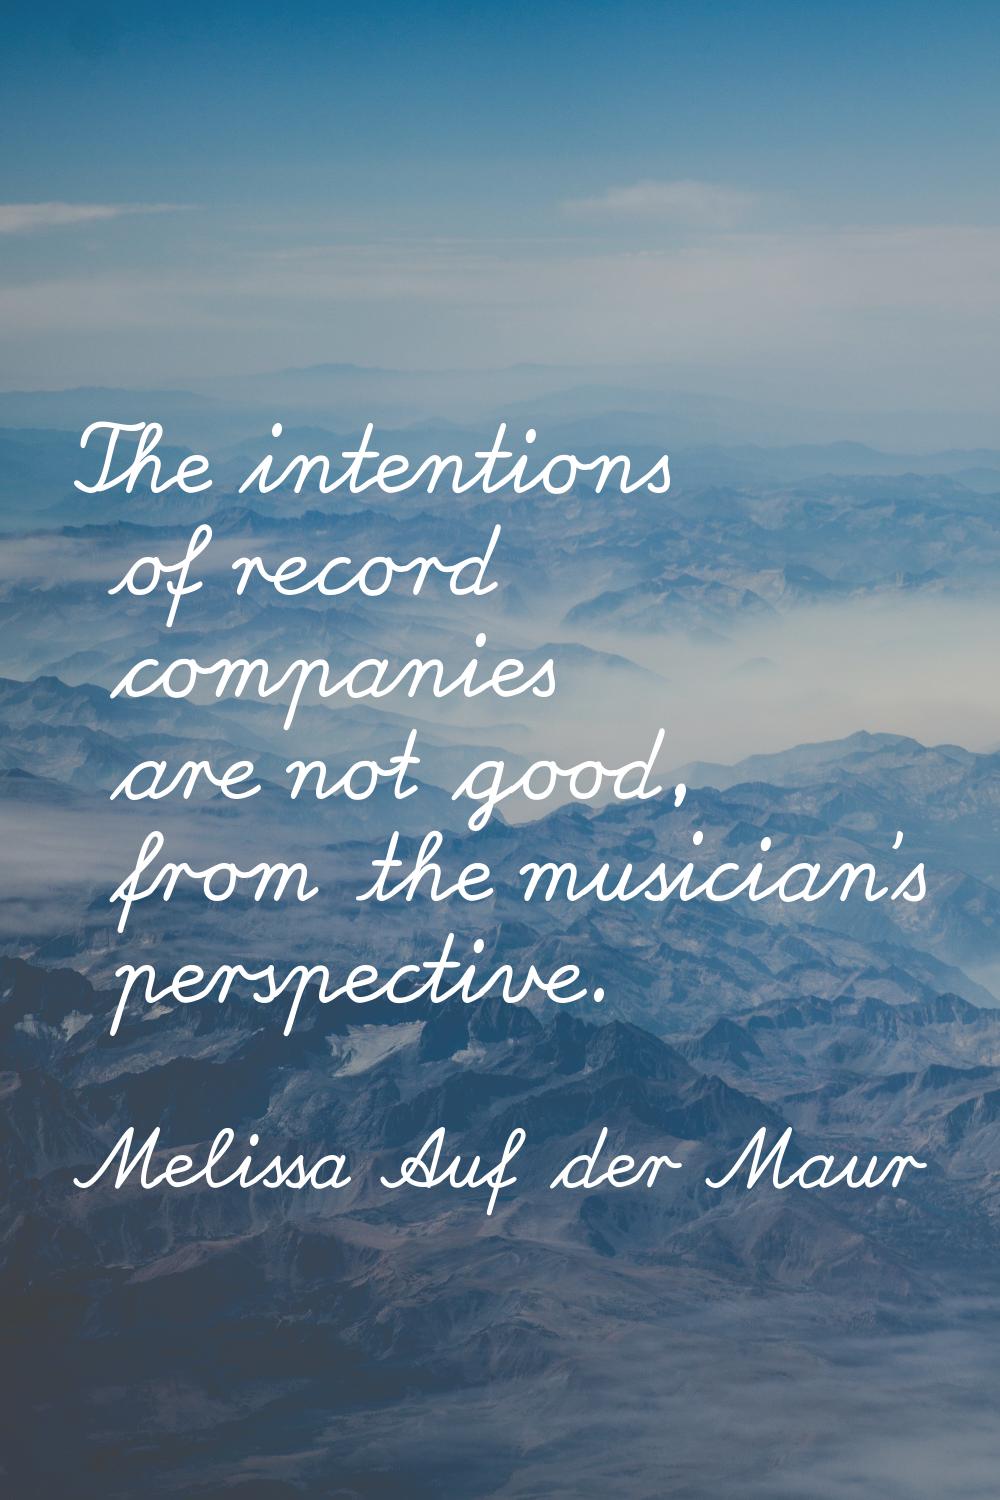 The intentions of record companies are not good, from the musician's perspective.